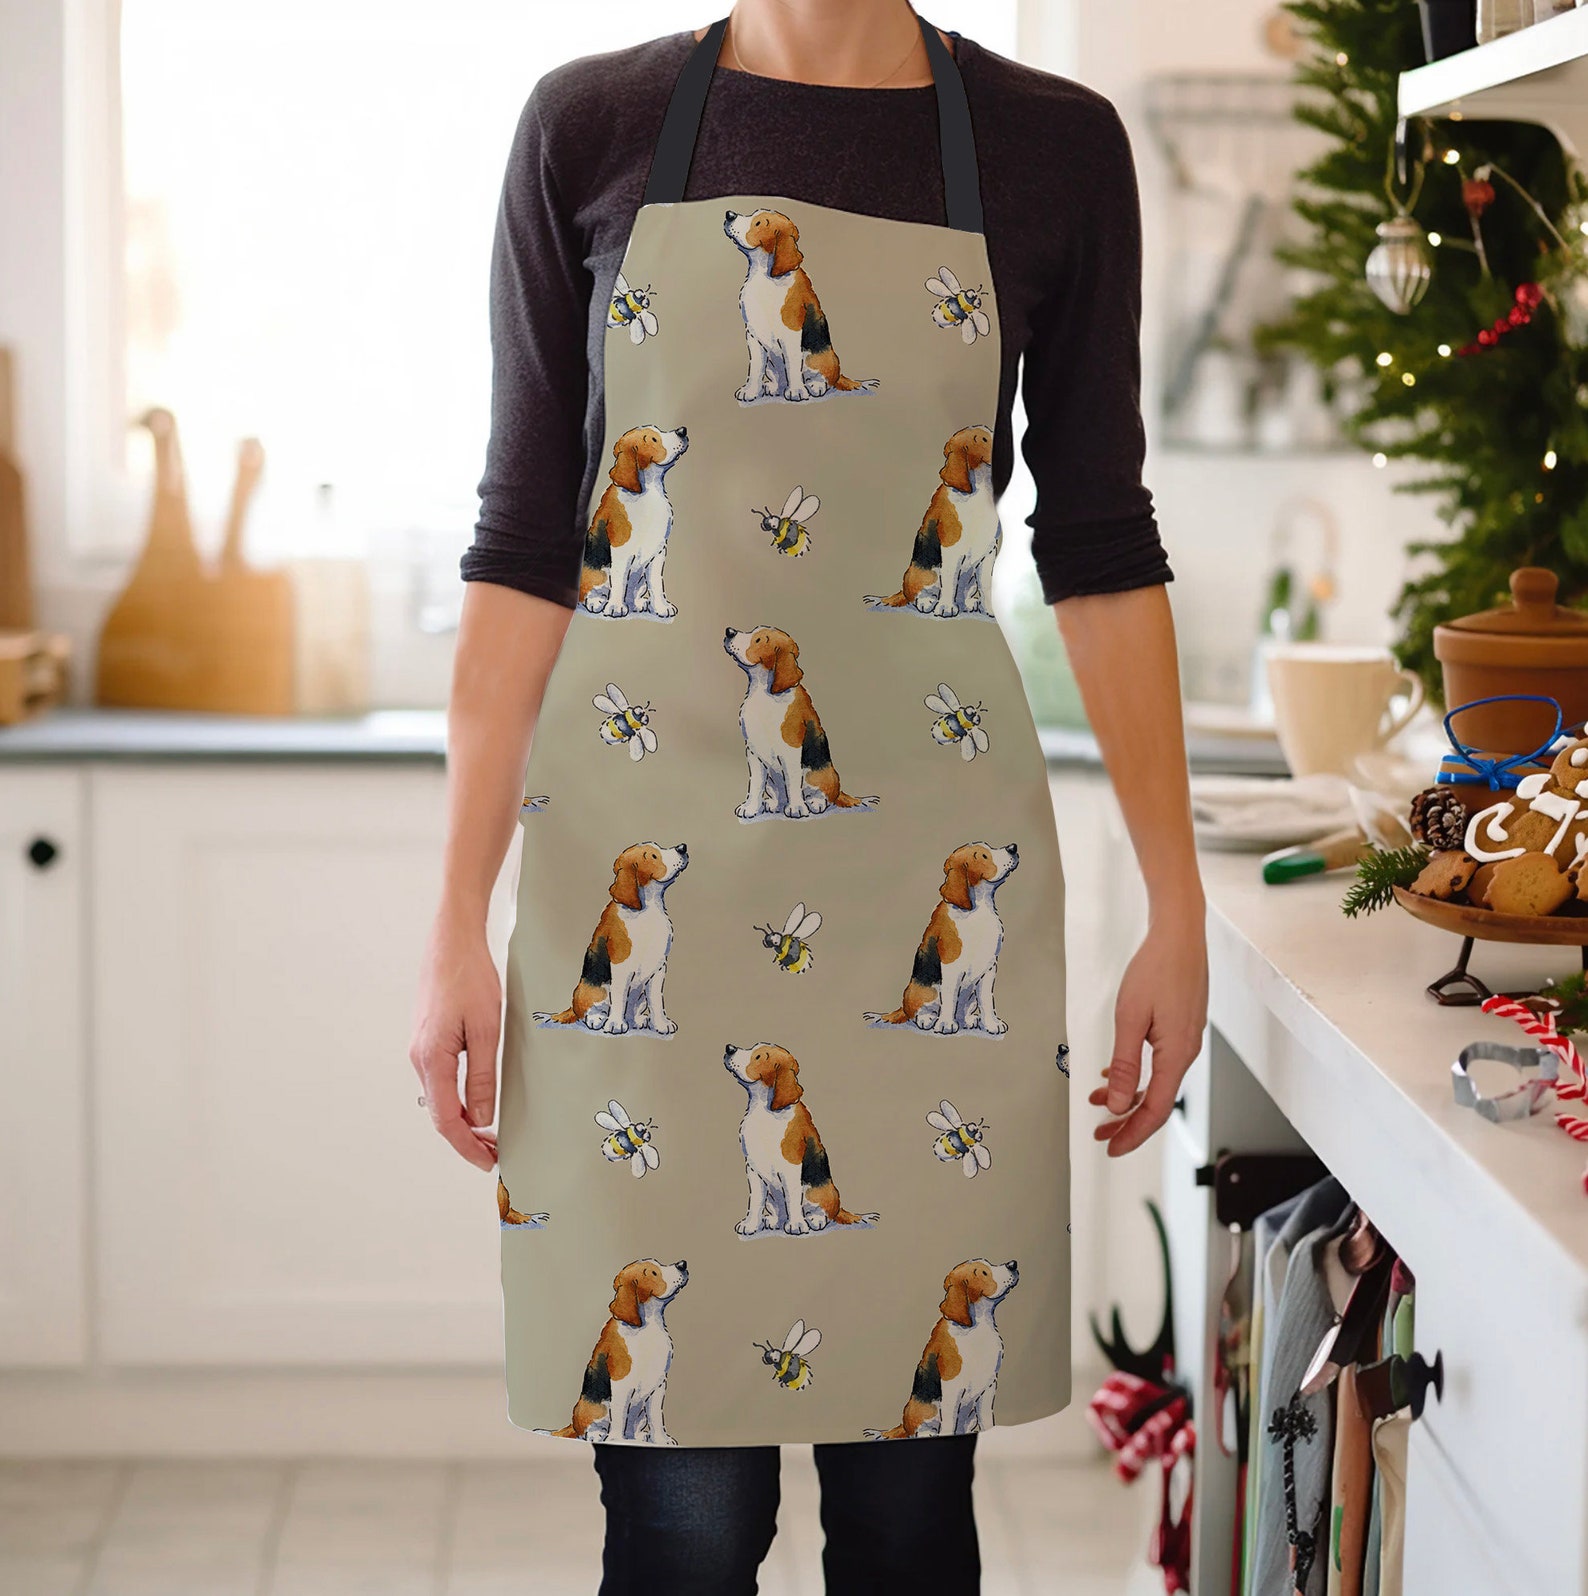 This fun apron would be a great gift to a beagle owner or enthusiast